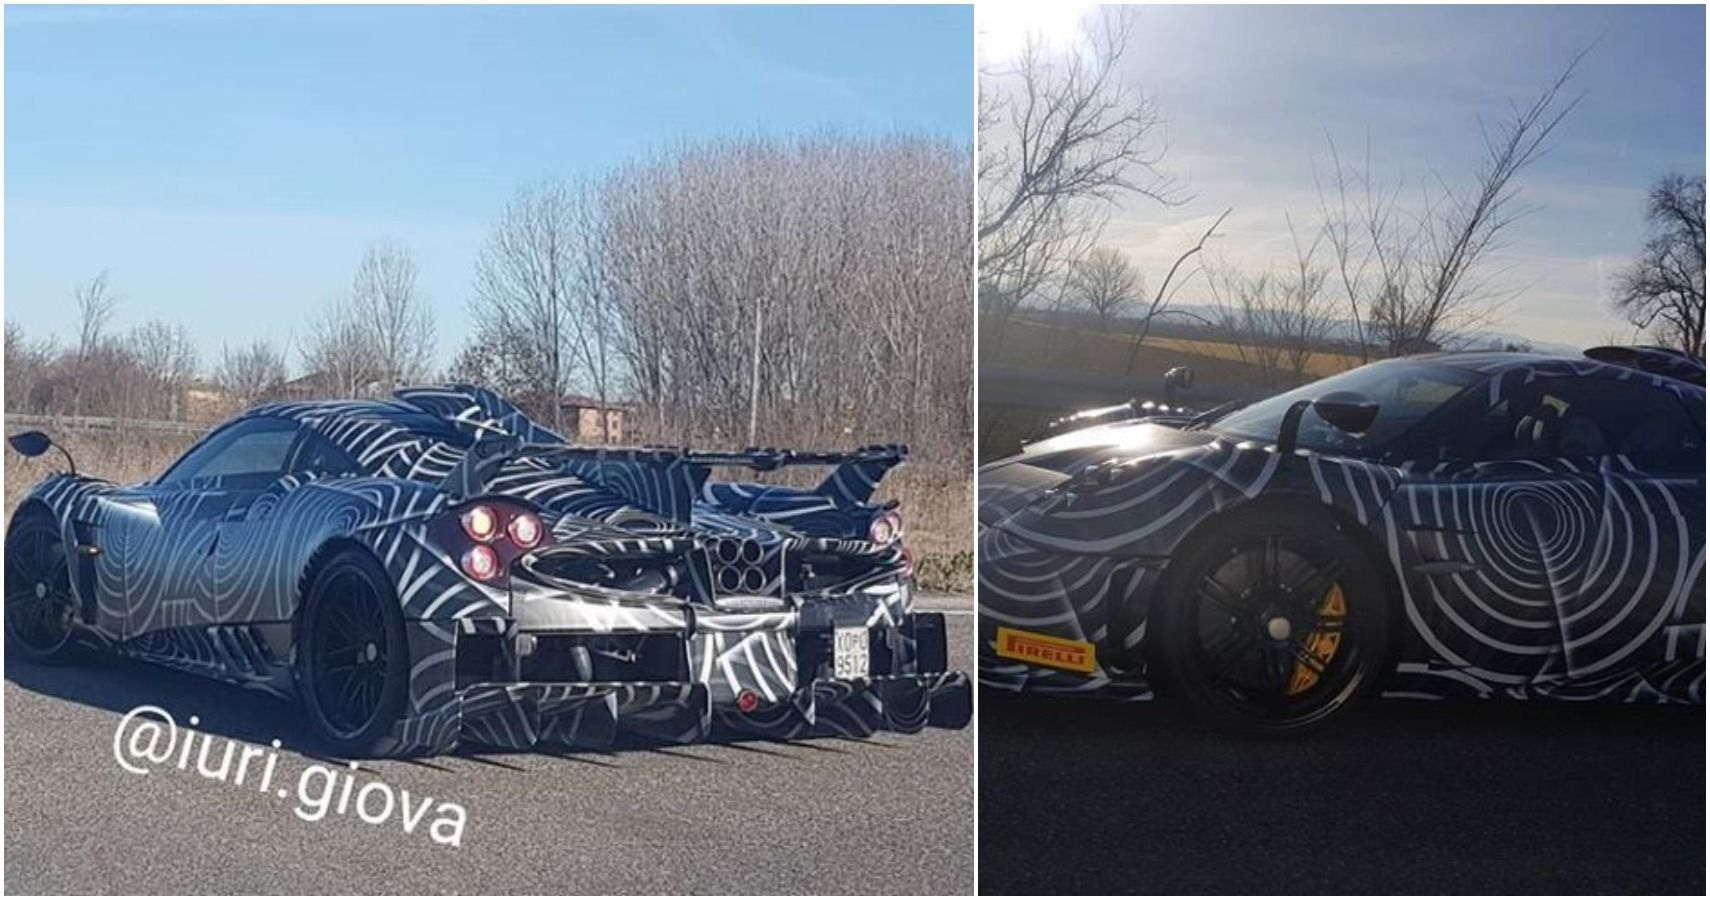 Mysterious New Pagani Huayra Spotted In The Wild